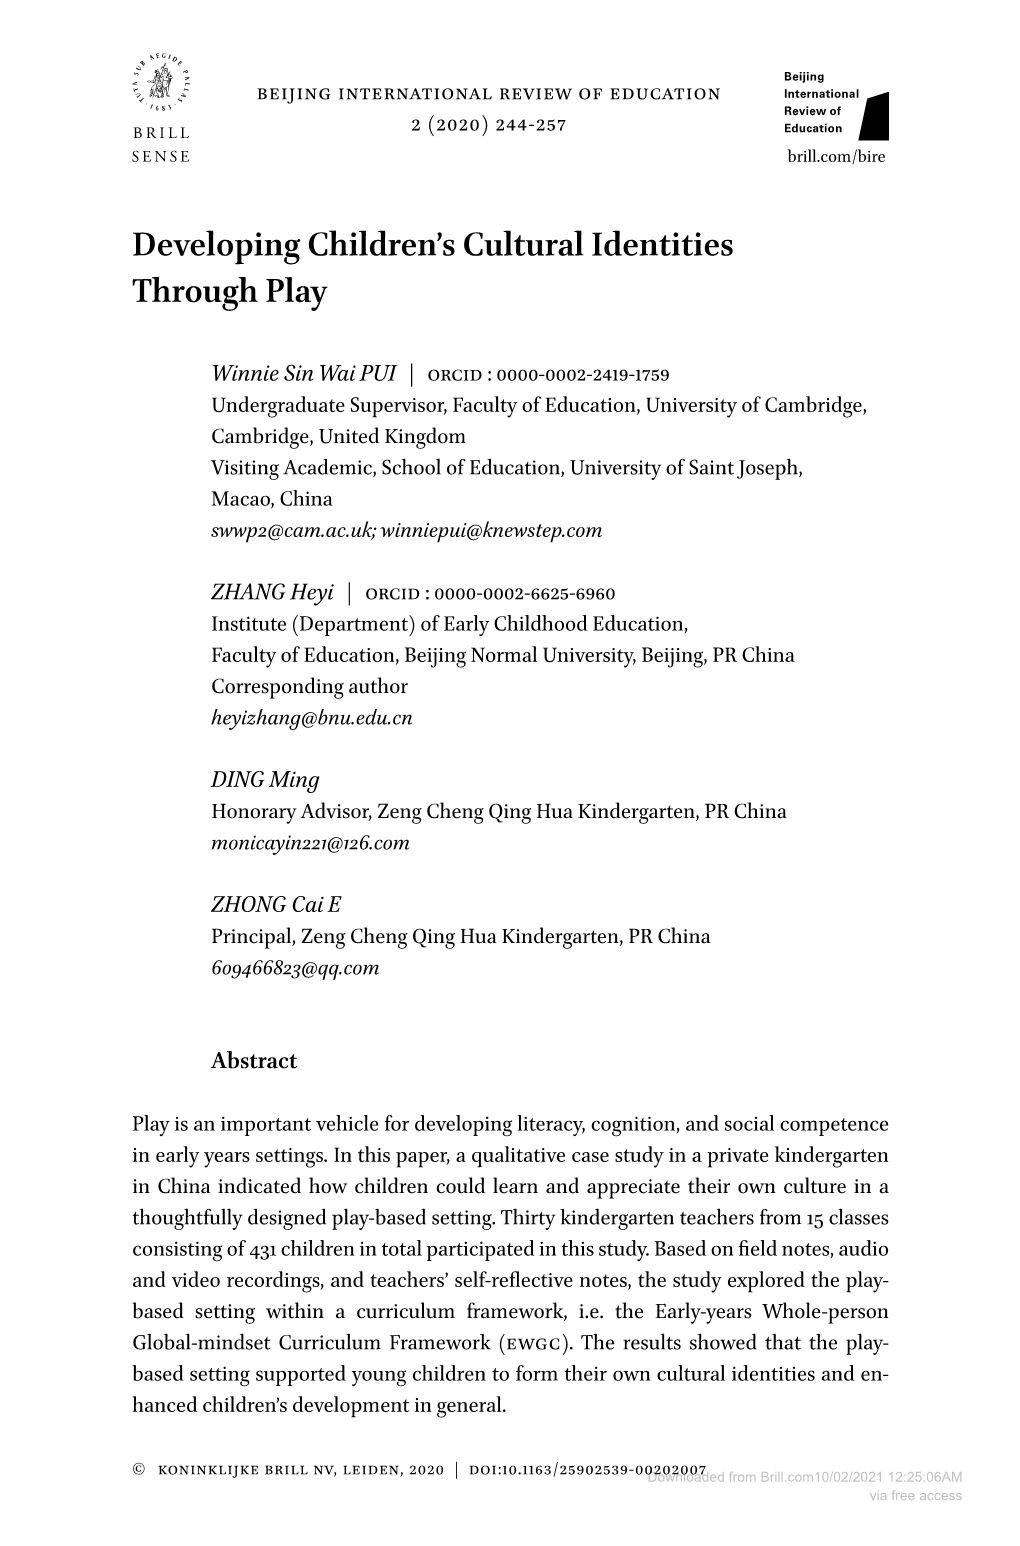 Developing Children's Cultural Identities Through Play